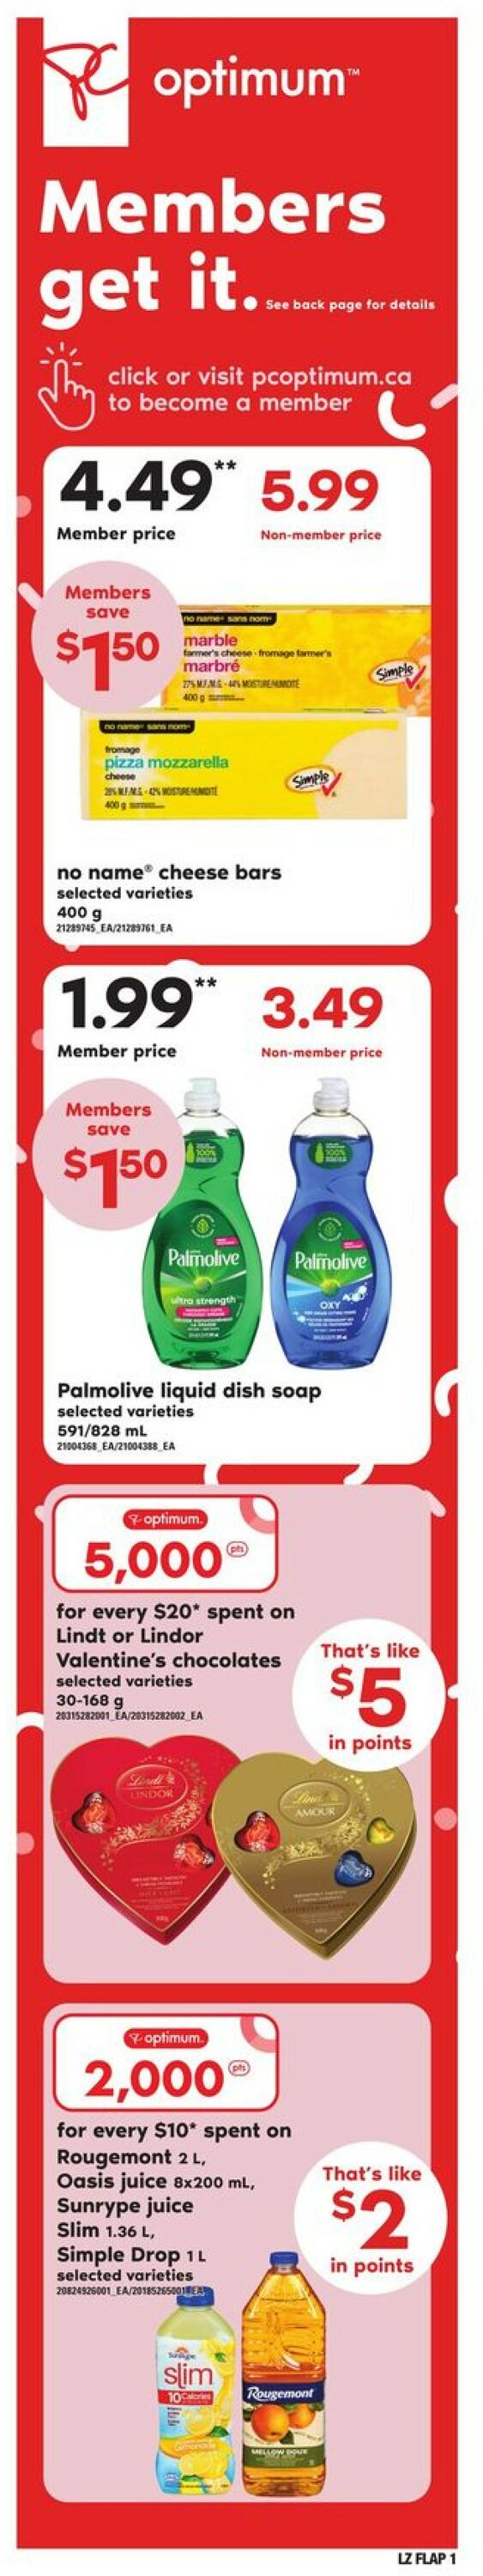 Zehrs Flyer from 02/02/2023